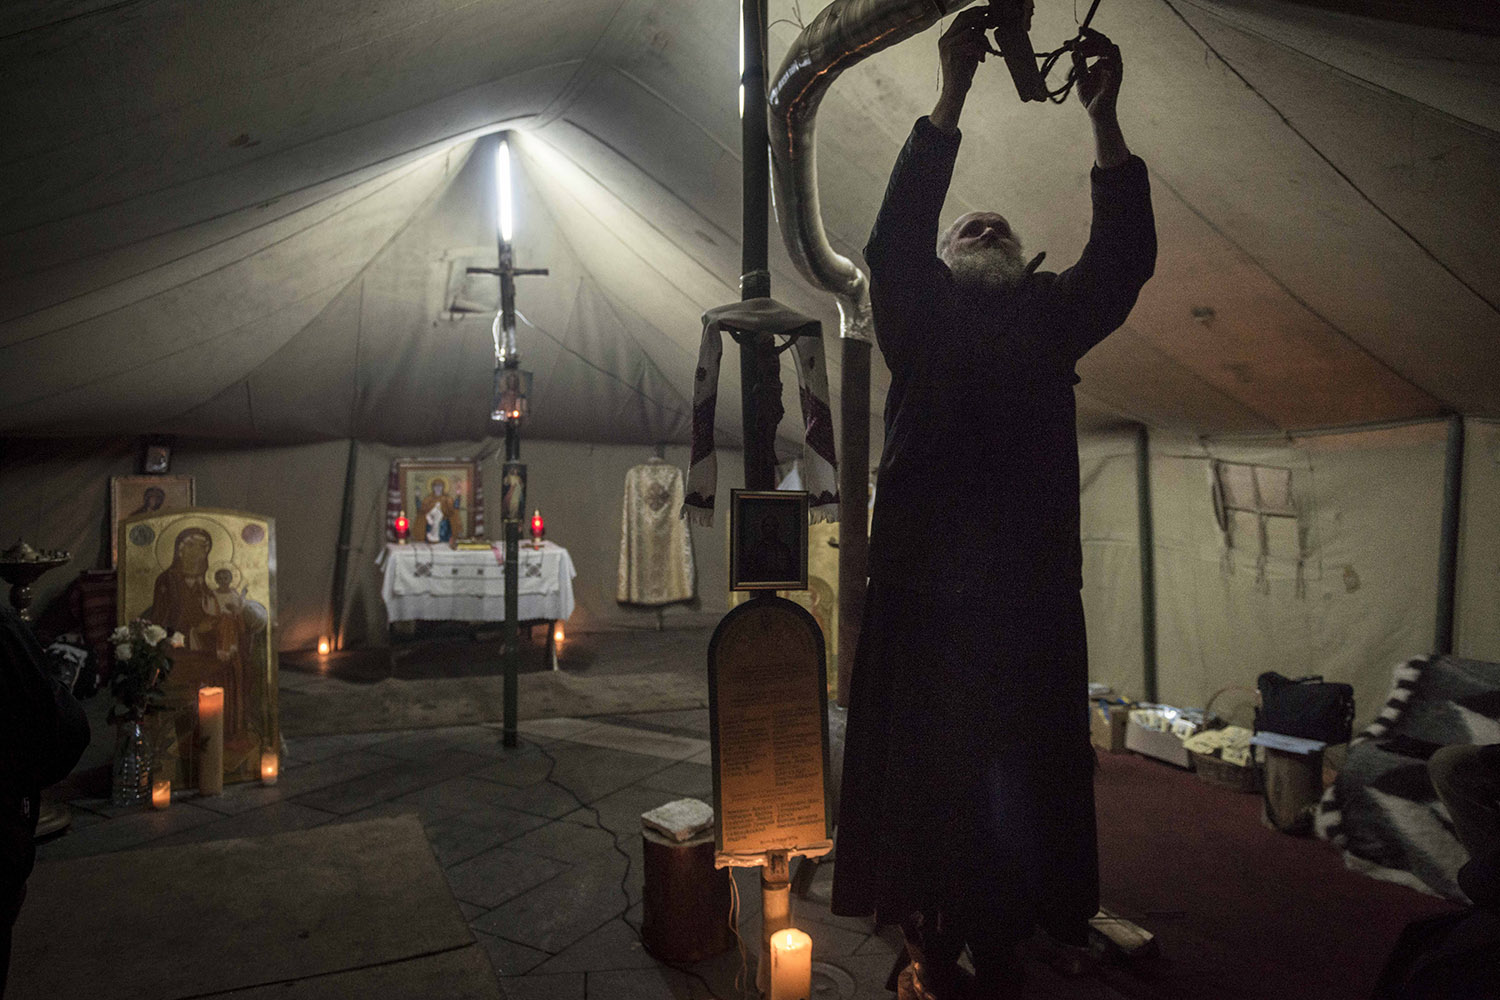 A priest maintains the prayer tent at Independence Square in Kiev, Ukraine.